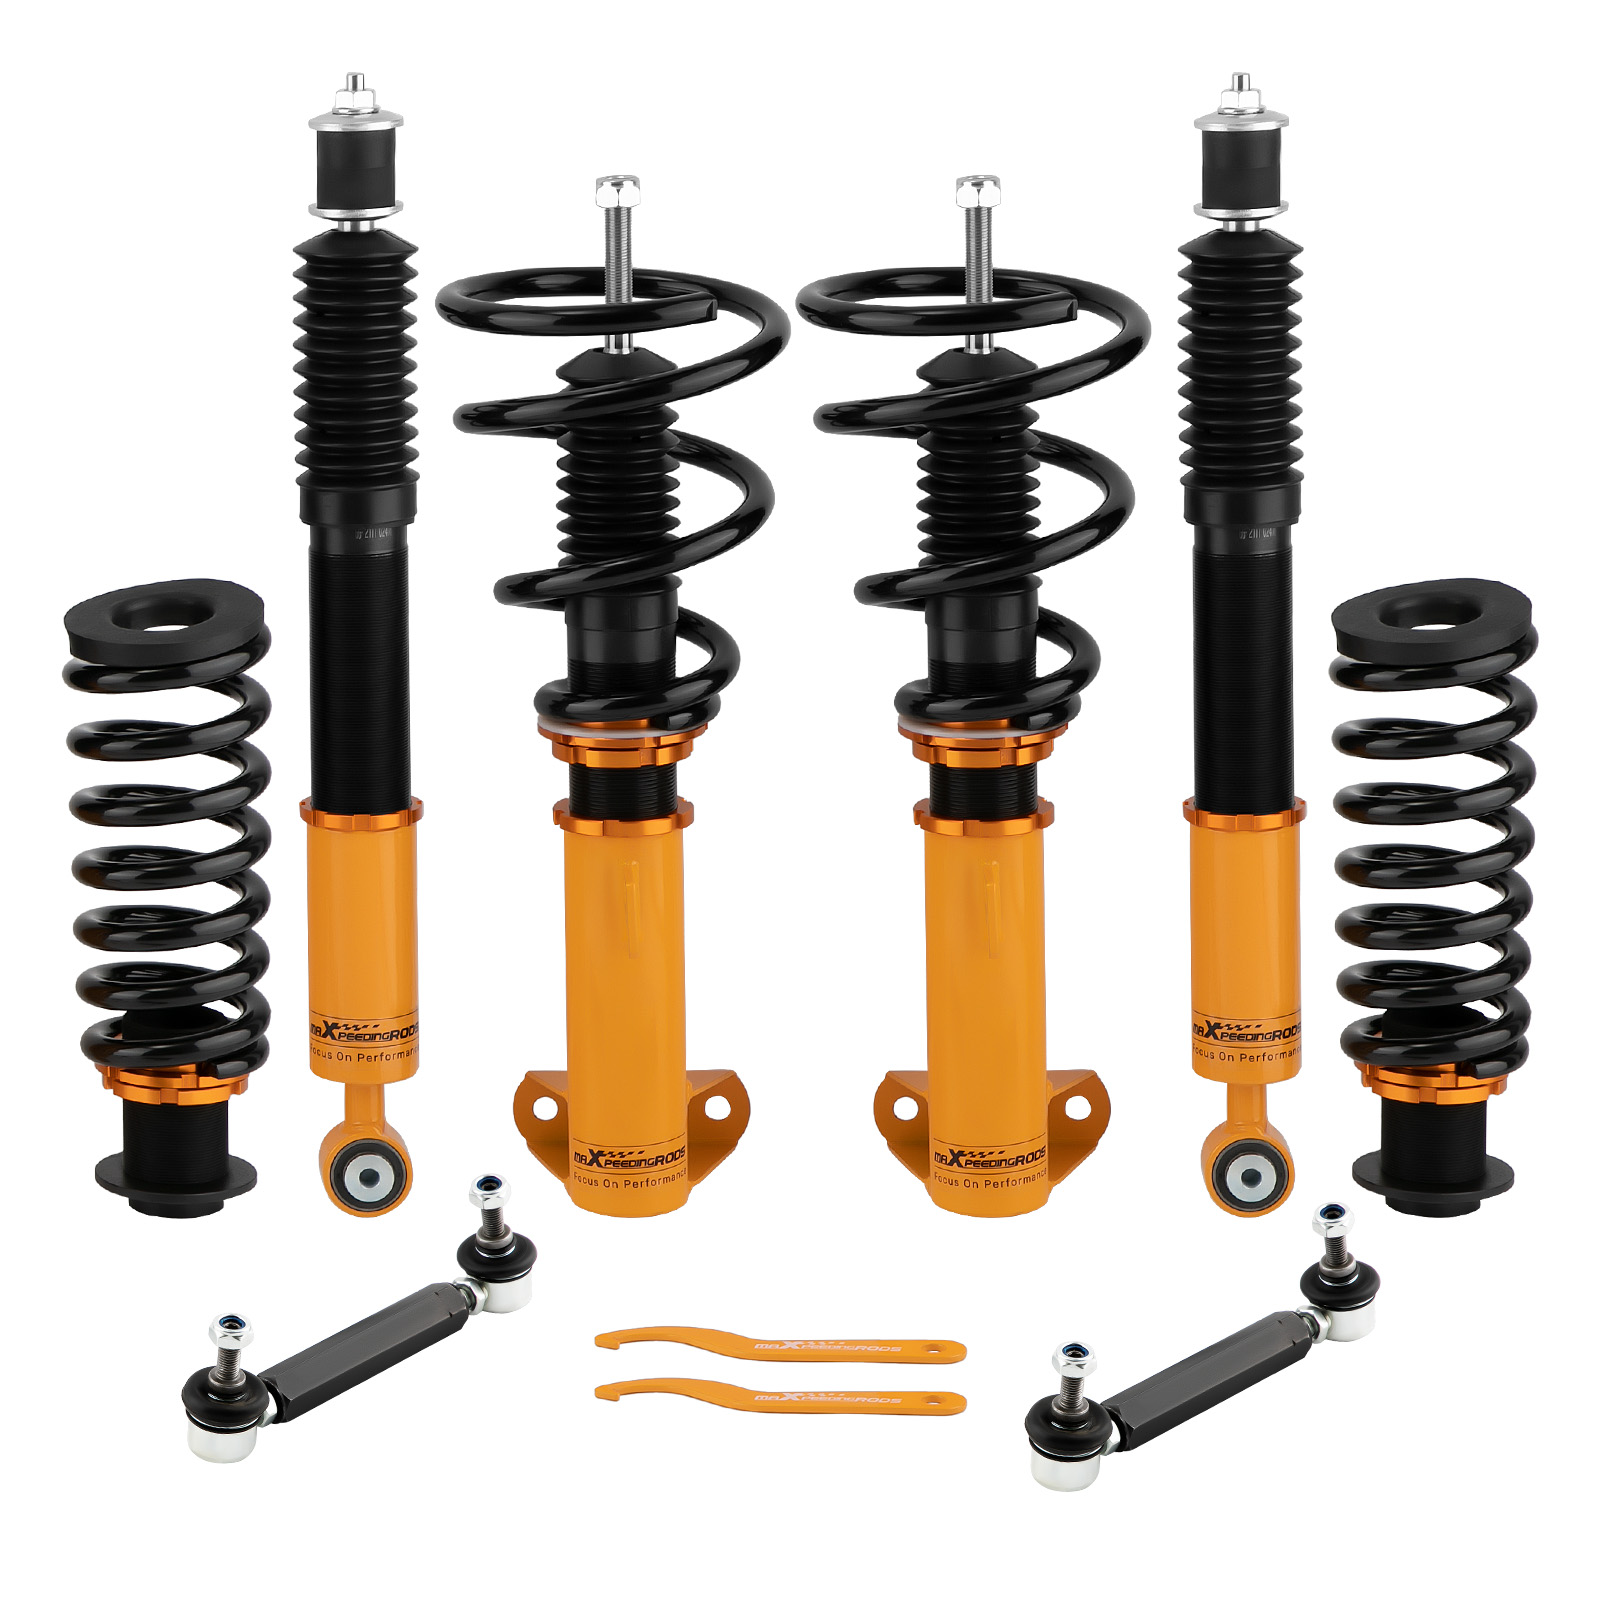 Coilover Lowering Kit For Mercedes Benz C-class W203 2000-2007 S203 C209 W209